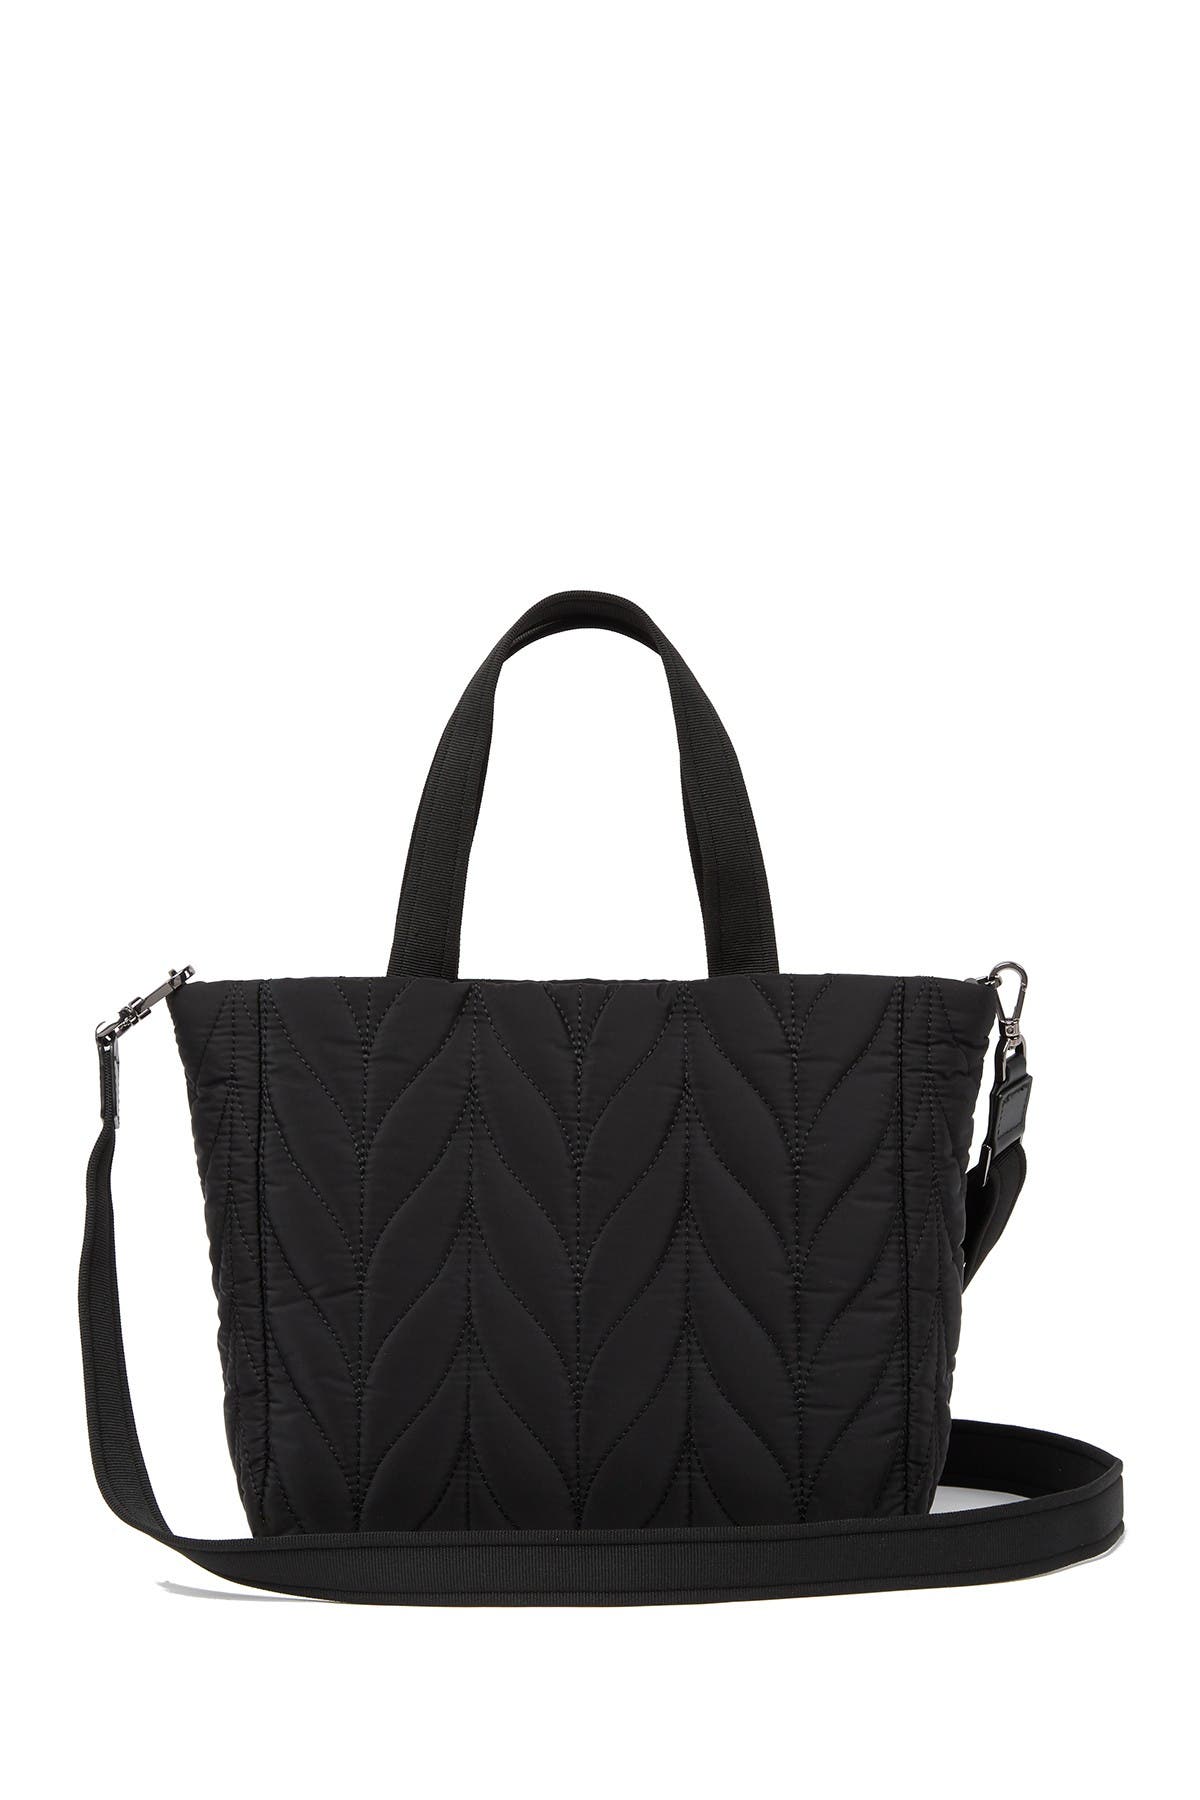 kate spade new york | ellie small quilted nylon tote bag | Nordstrom Rack